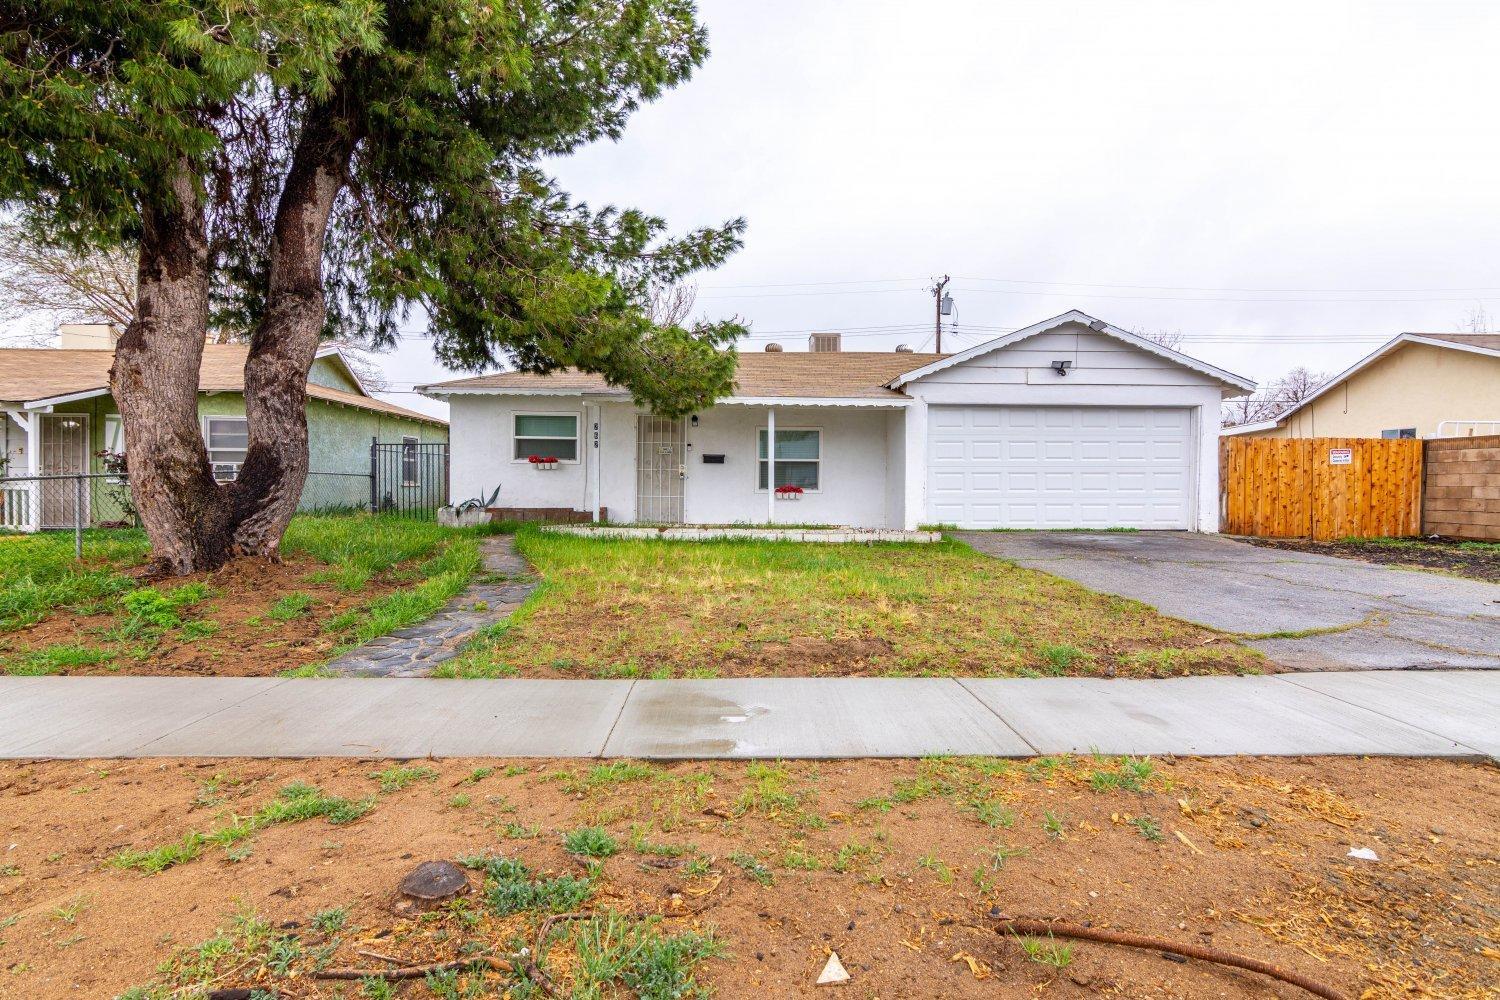 262 Pictorial Street, Palmdale, CA 93550